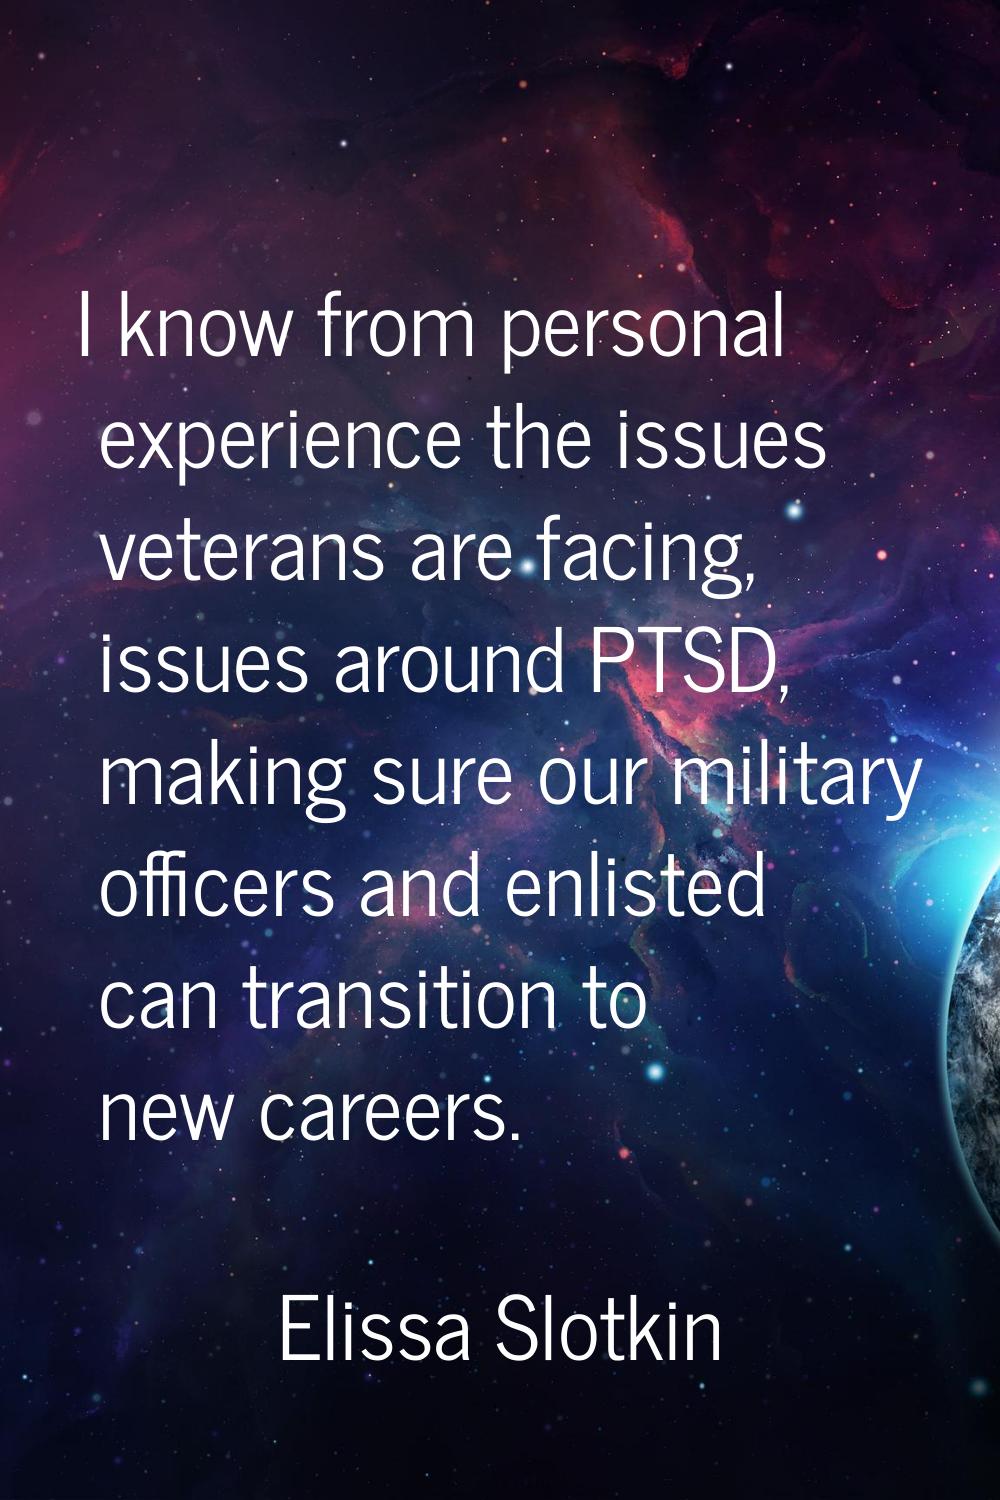 I know from personal experience the issues veterans are facing, issues around PTSD, making sure our